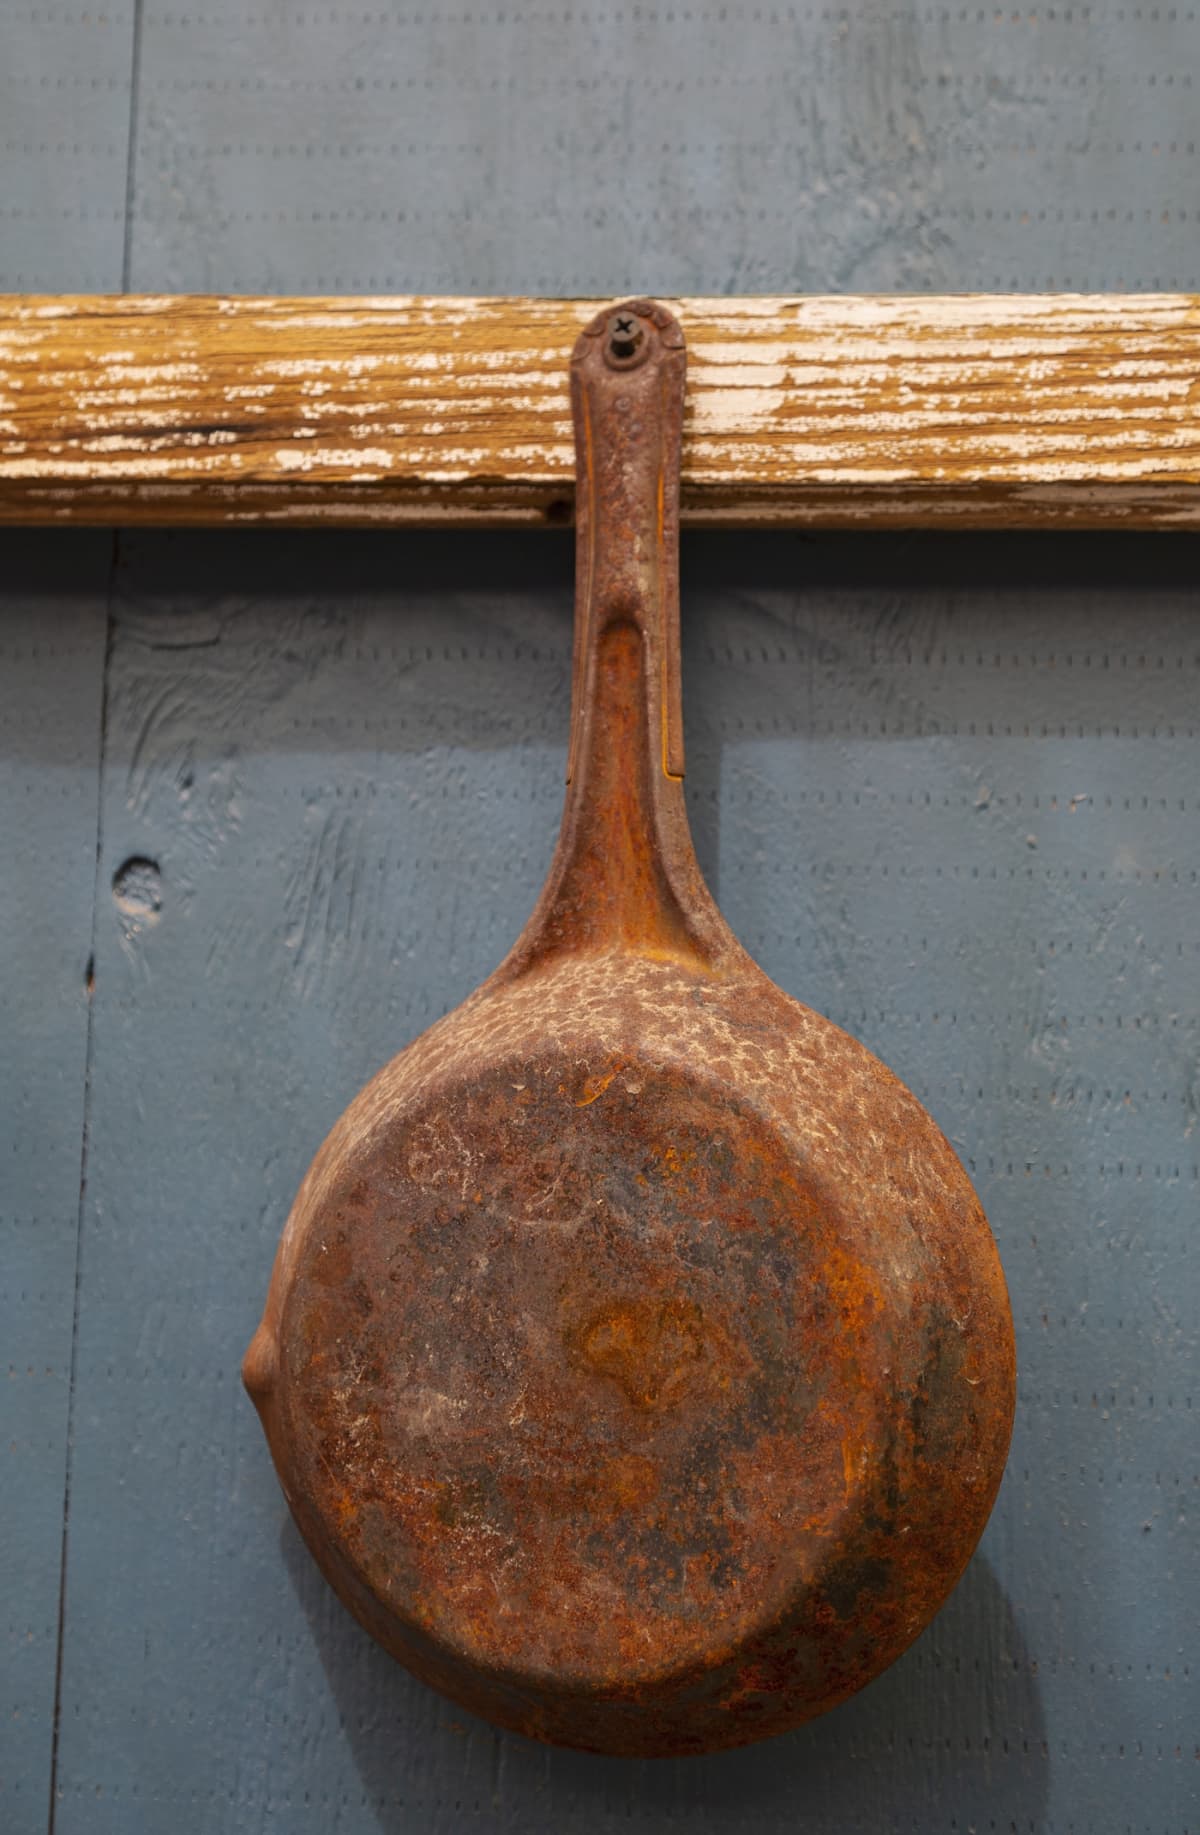 A rusty pan hanging on the wall